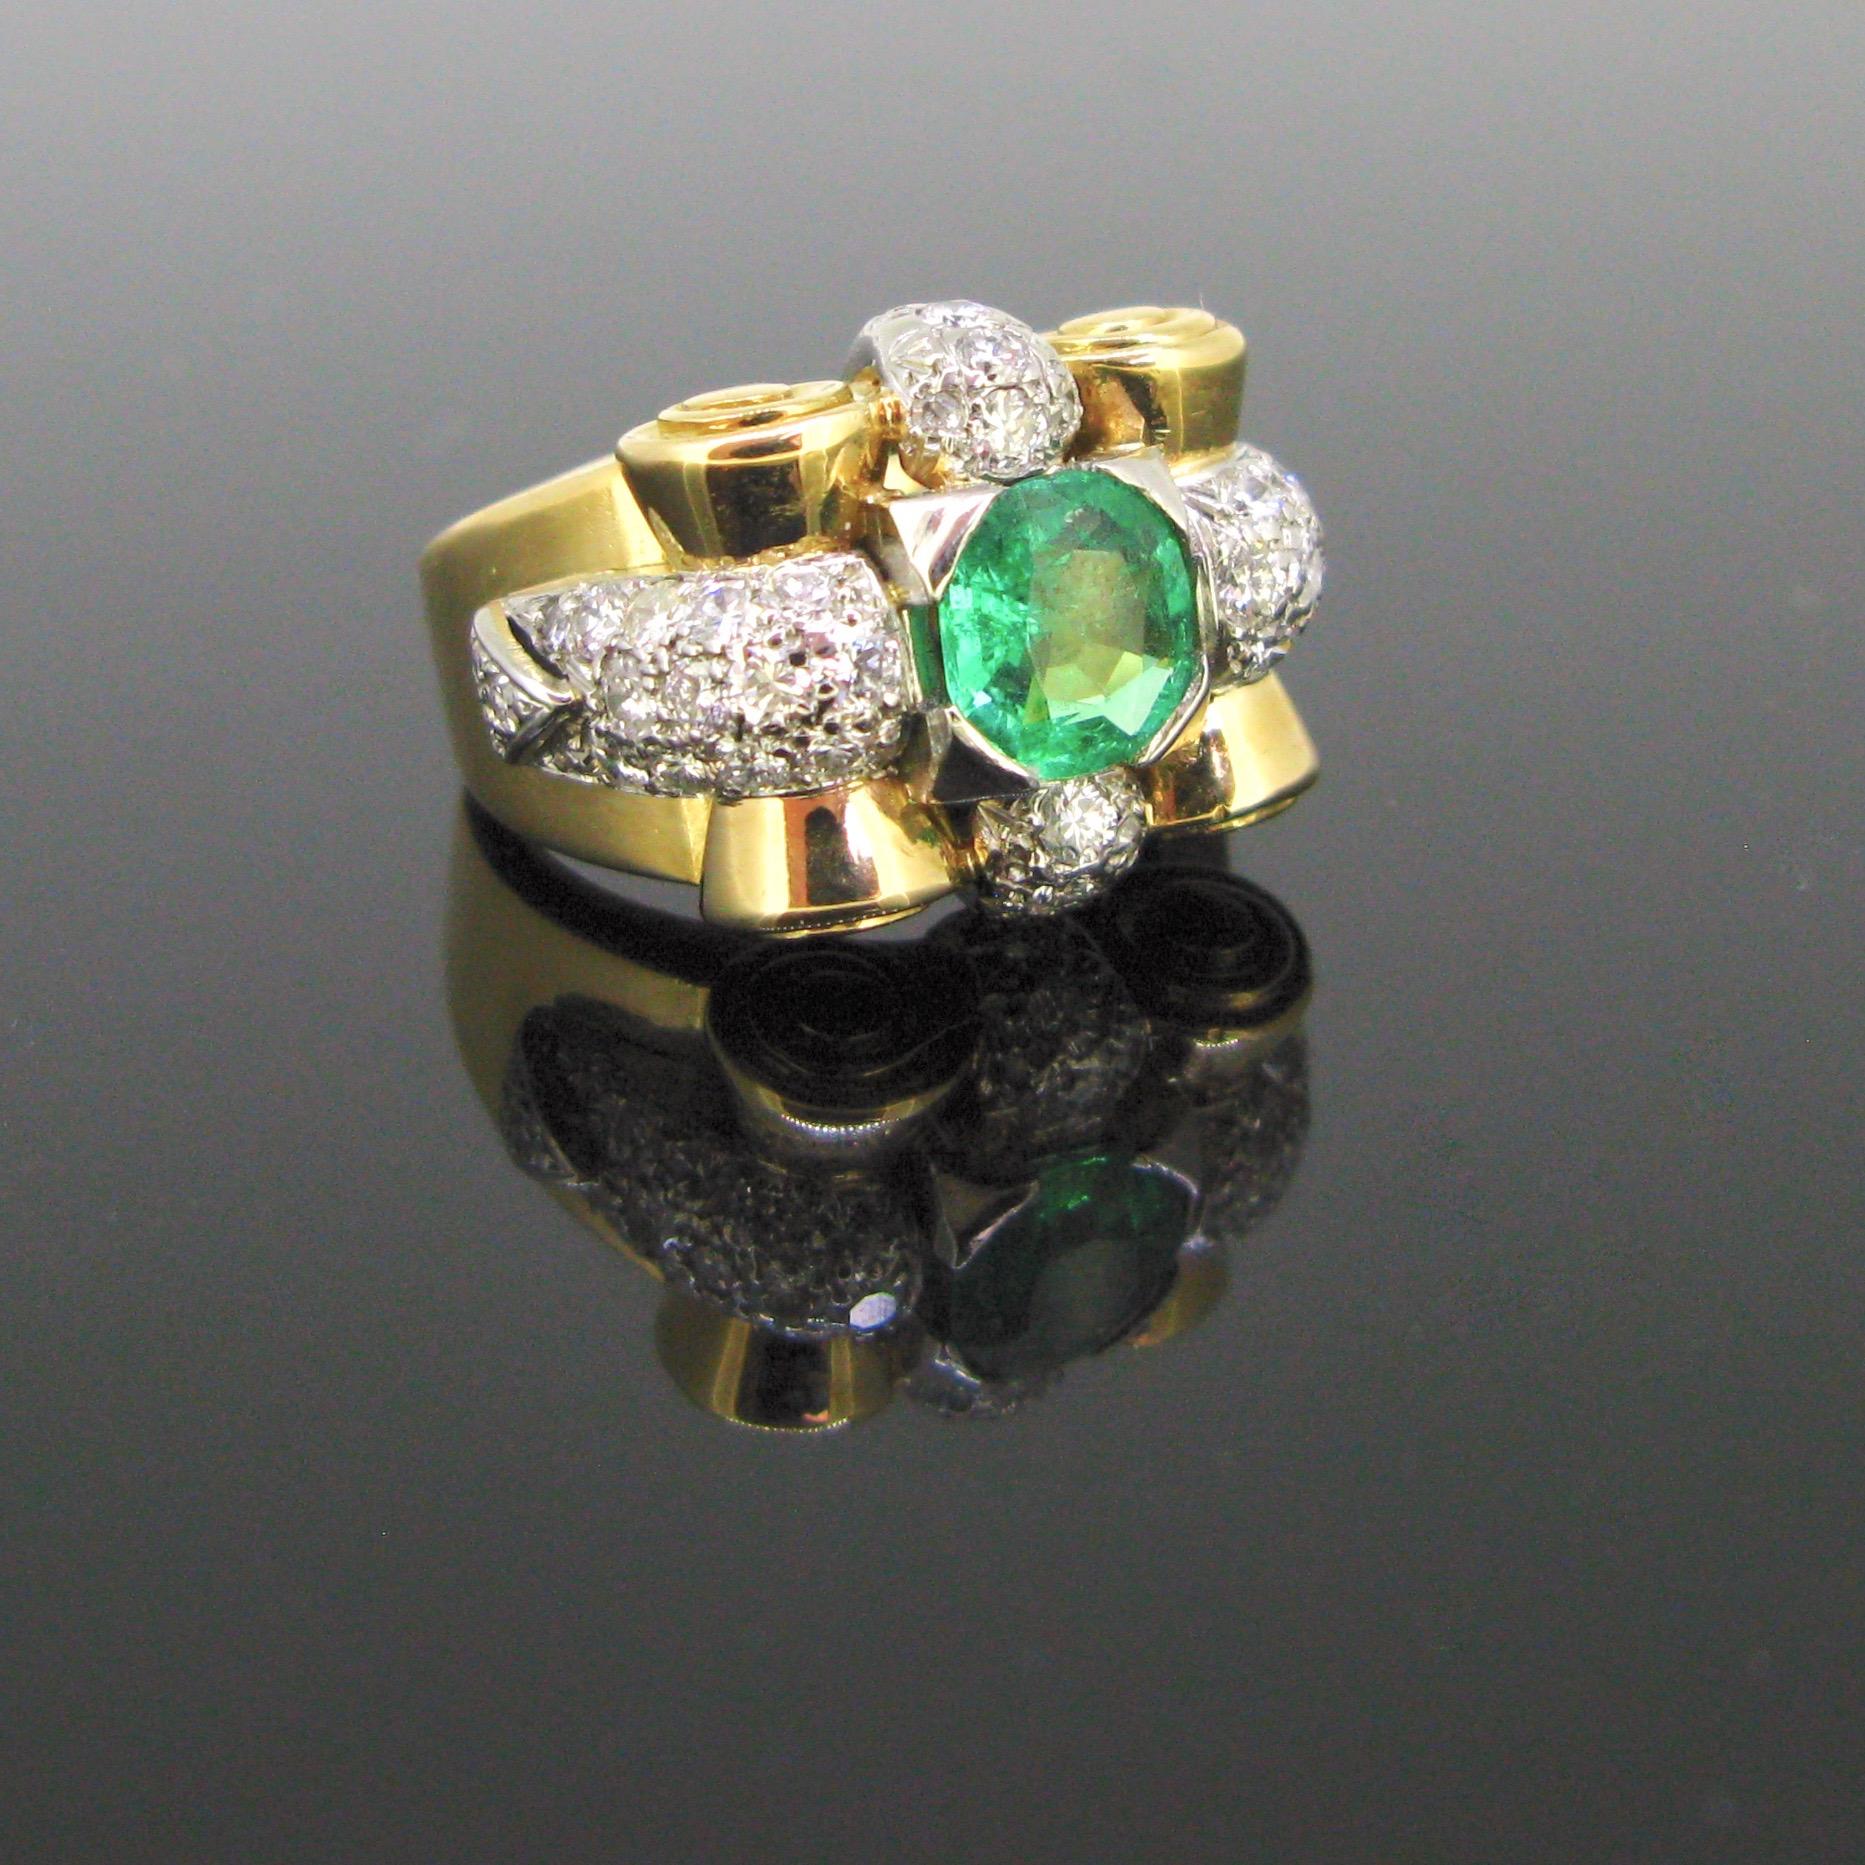 This ring has a beautiful geometric and bold design, characteristic of the Retro period. It is set with a vibrant green emerald from Colombia weighing around 1.10ct. The ring is adorned with brilliant and single cut diamonds, set on platinum. It has